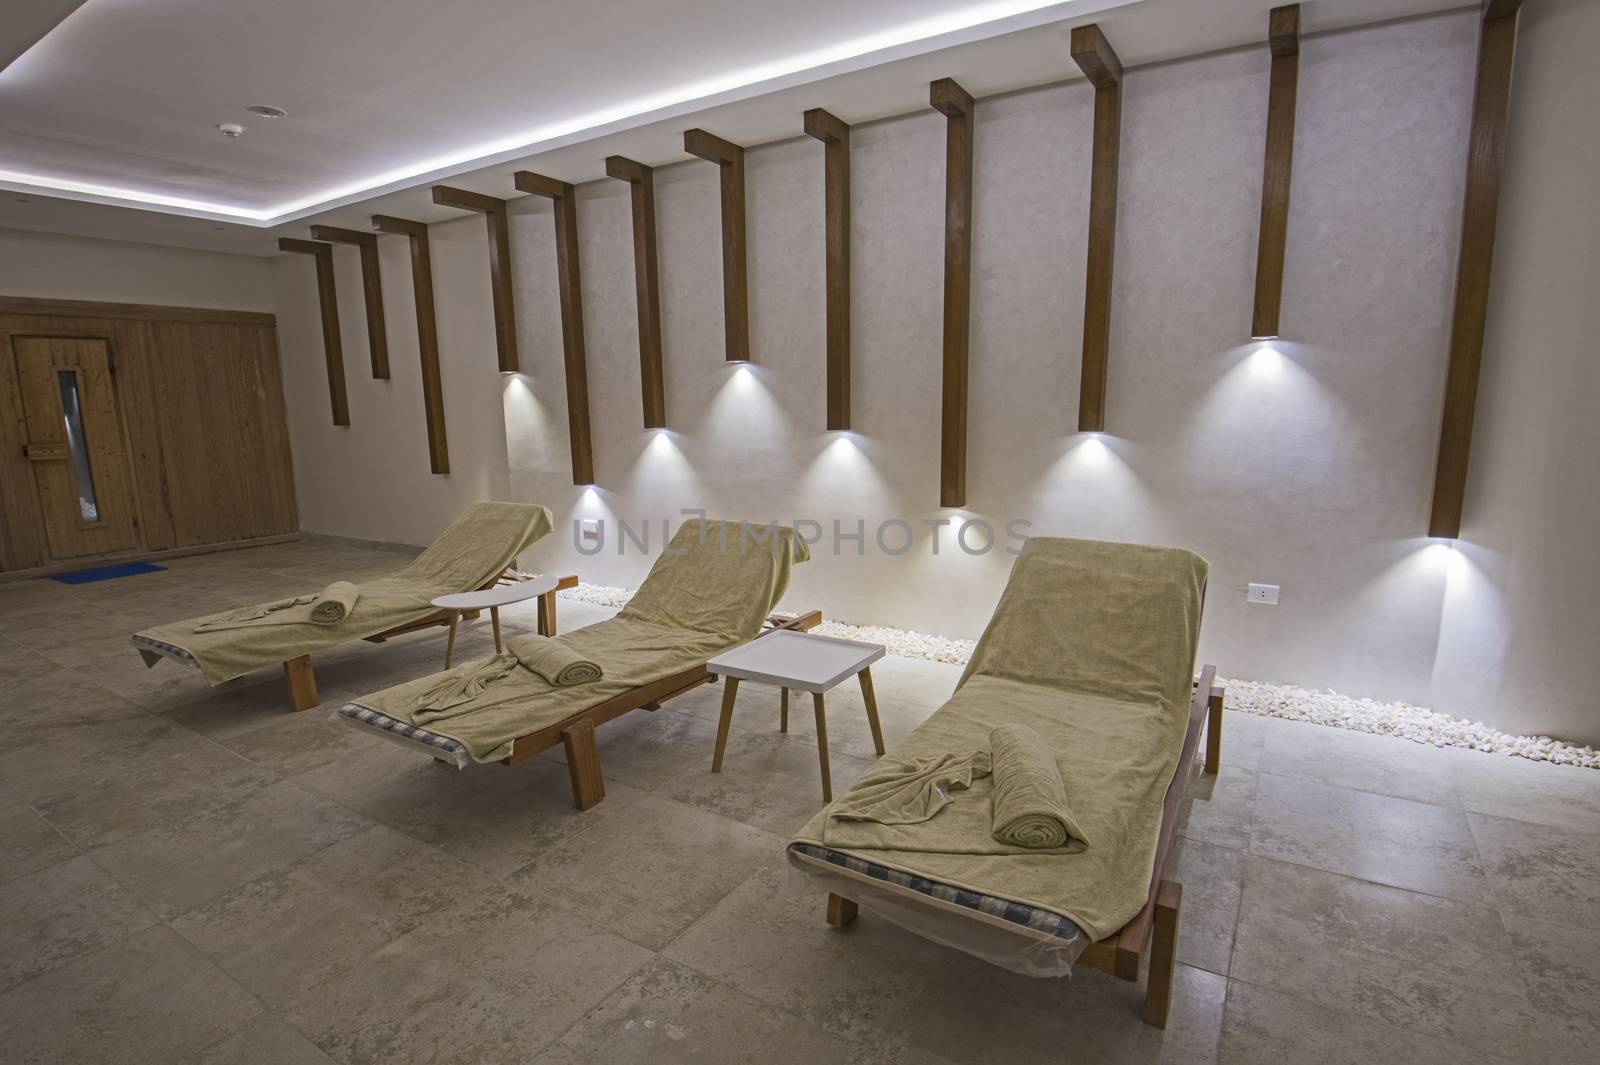 Relaxation area inside a luxury health spa with beds and towels